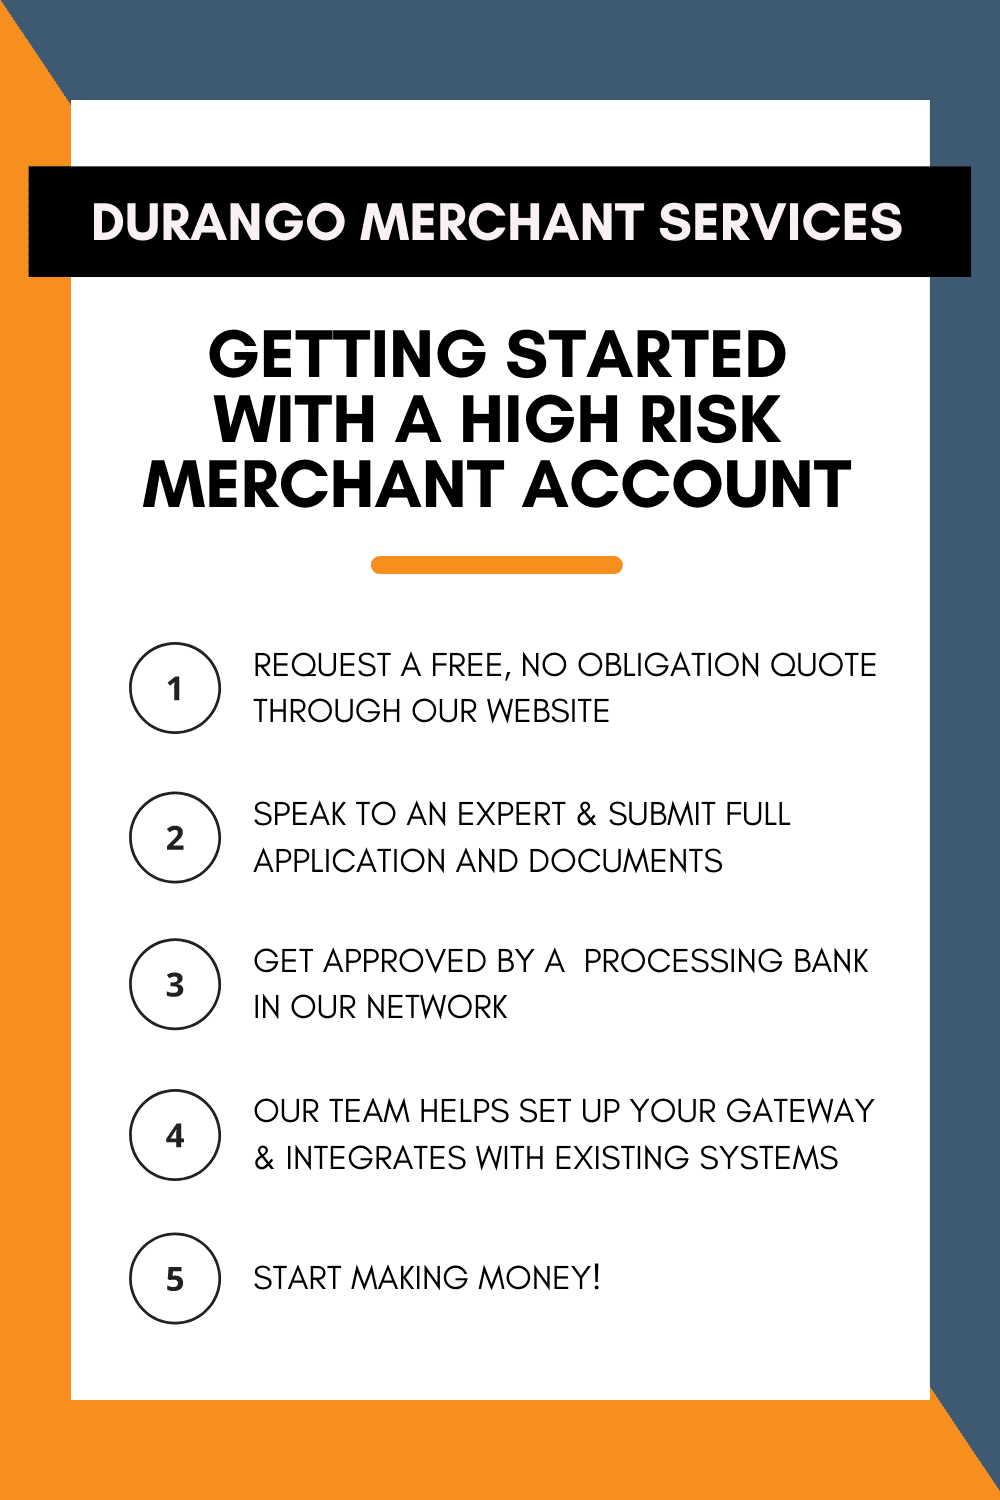 Getting started with a high risk merchant account: 1) Request a free no obligation quote through our website 2) Speak to an expert and submit full application and documents 3) Get approved by the processing bank in our network 4) Our team sets up your gateway and integrates with existing systems 5) Start making money! 